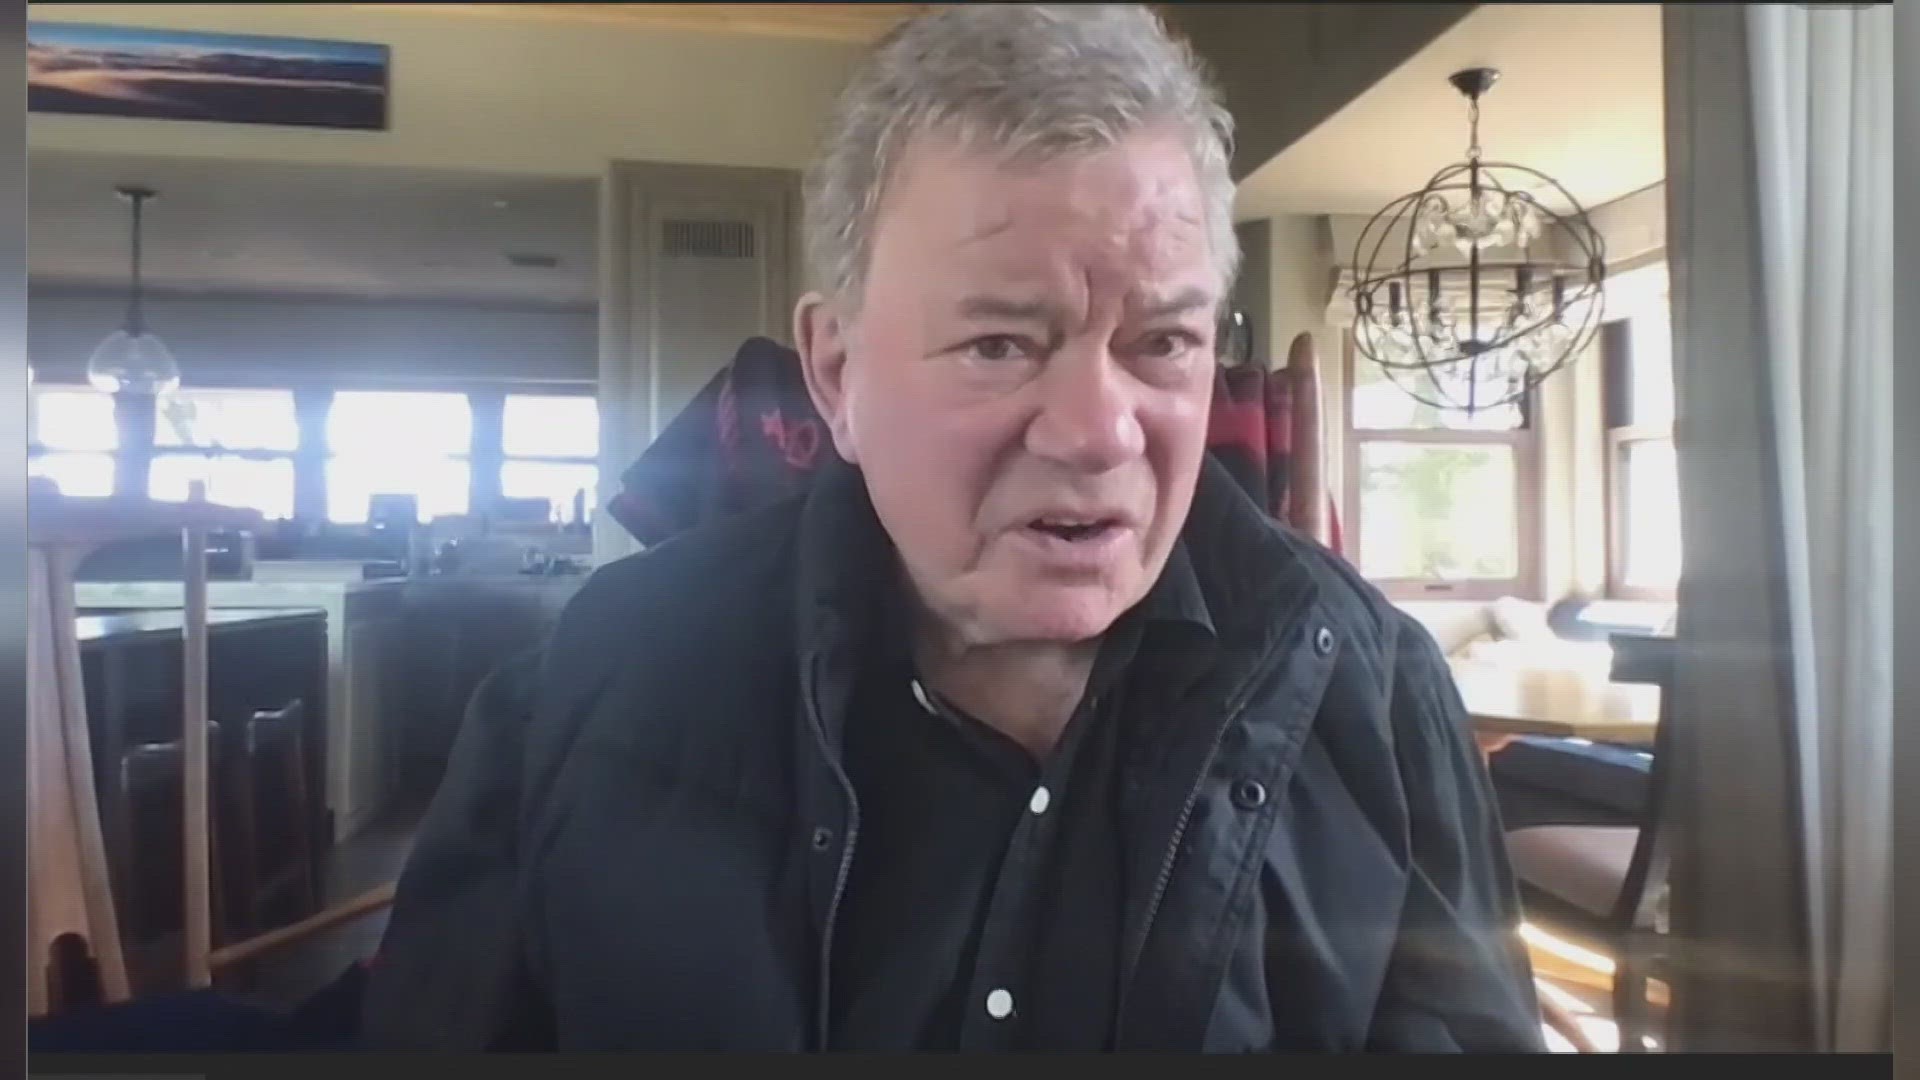 Shatner, will take part in the Hoosier Cosmic Celebration on April 8 to celebrate the total solar eclipse. He shares excitement about the once-in-a-lifetime event.